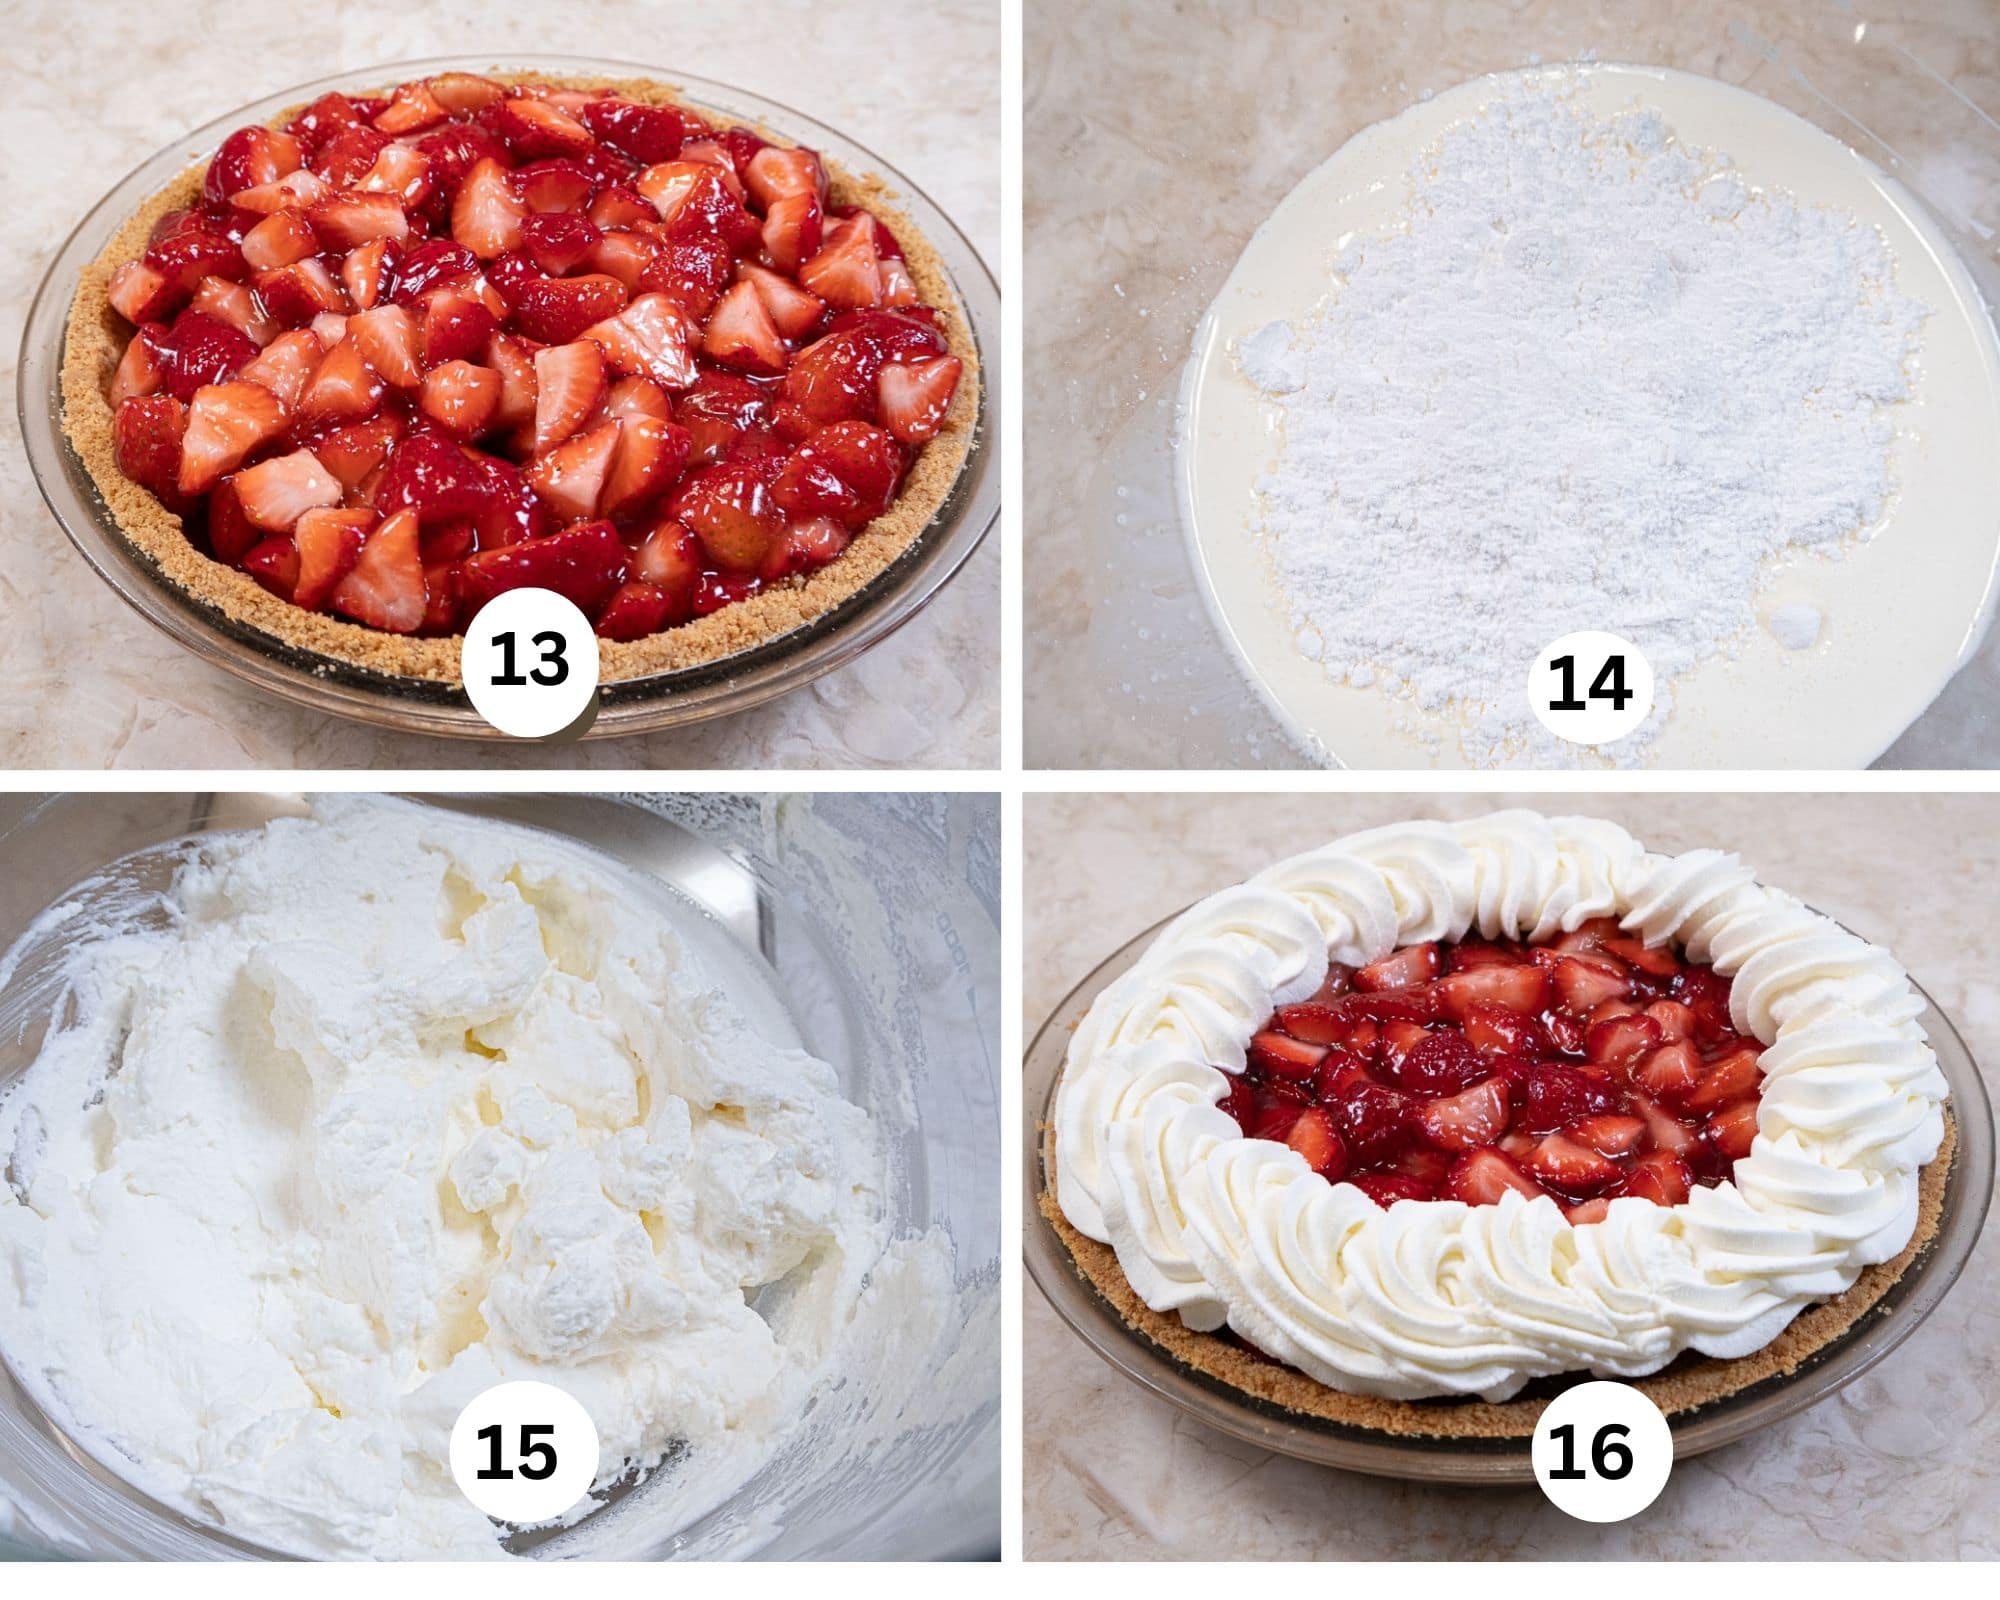 The final collage shows the strawberry filling in the pie shell, the powdered sugar and cream in a mixing bowl, whipped and piped onto the edge of the strawberry pie.